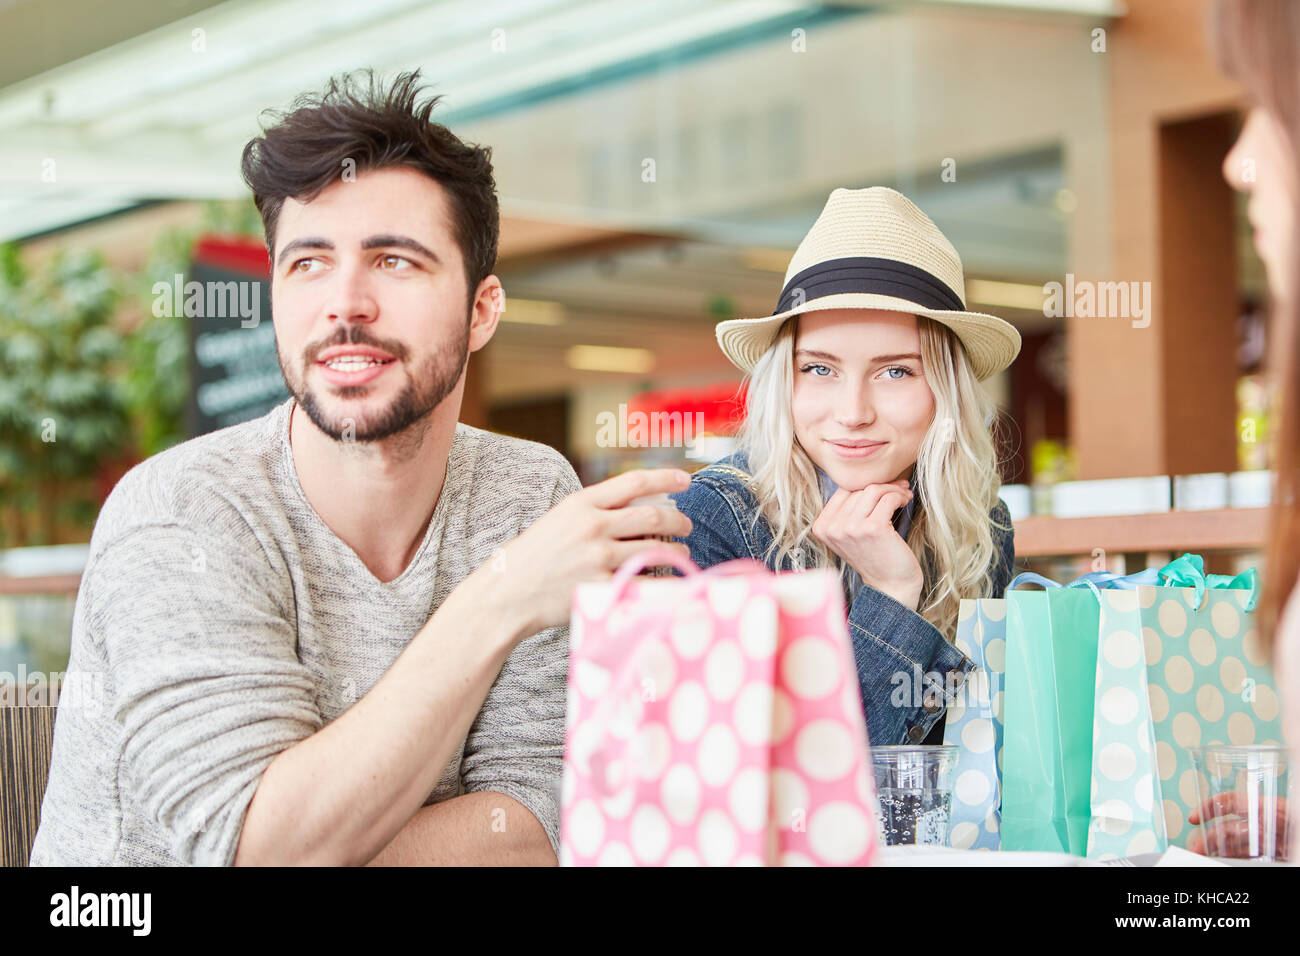 Group of relaxed teenagers in a shopping break at the mall Stock Photo